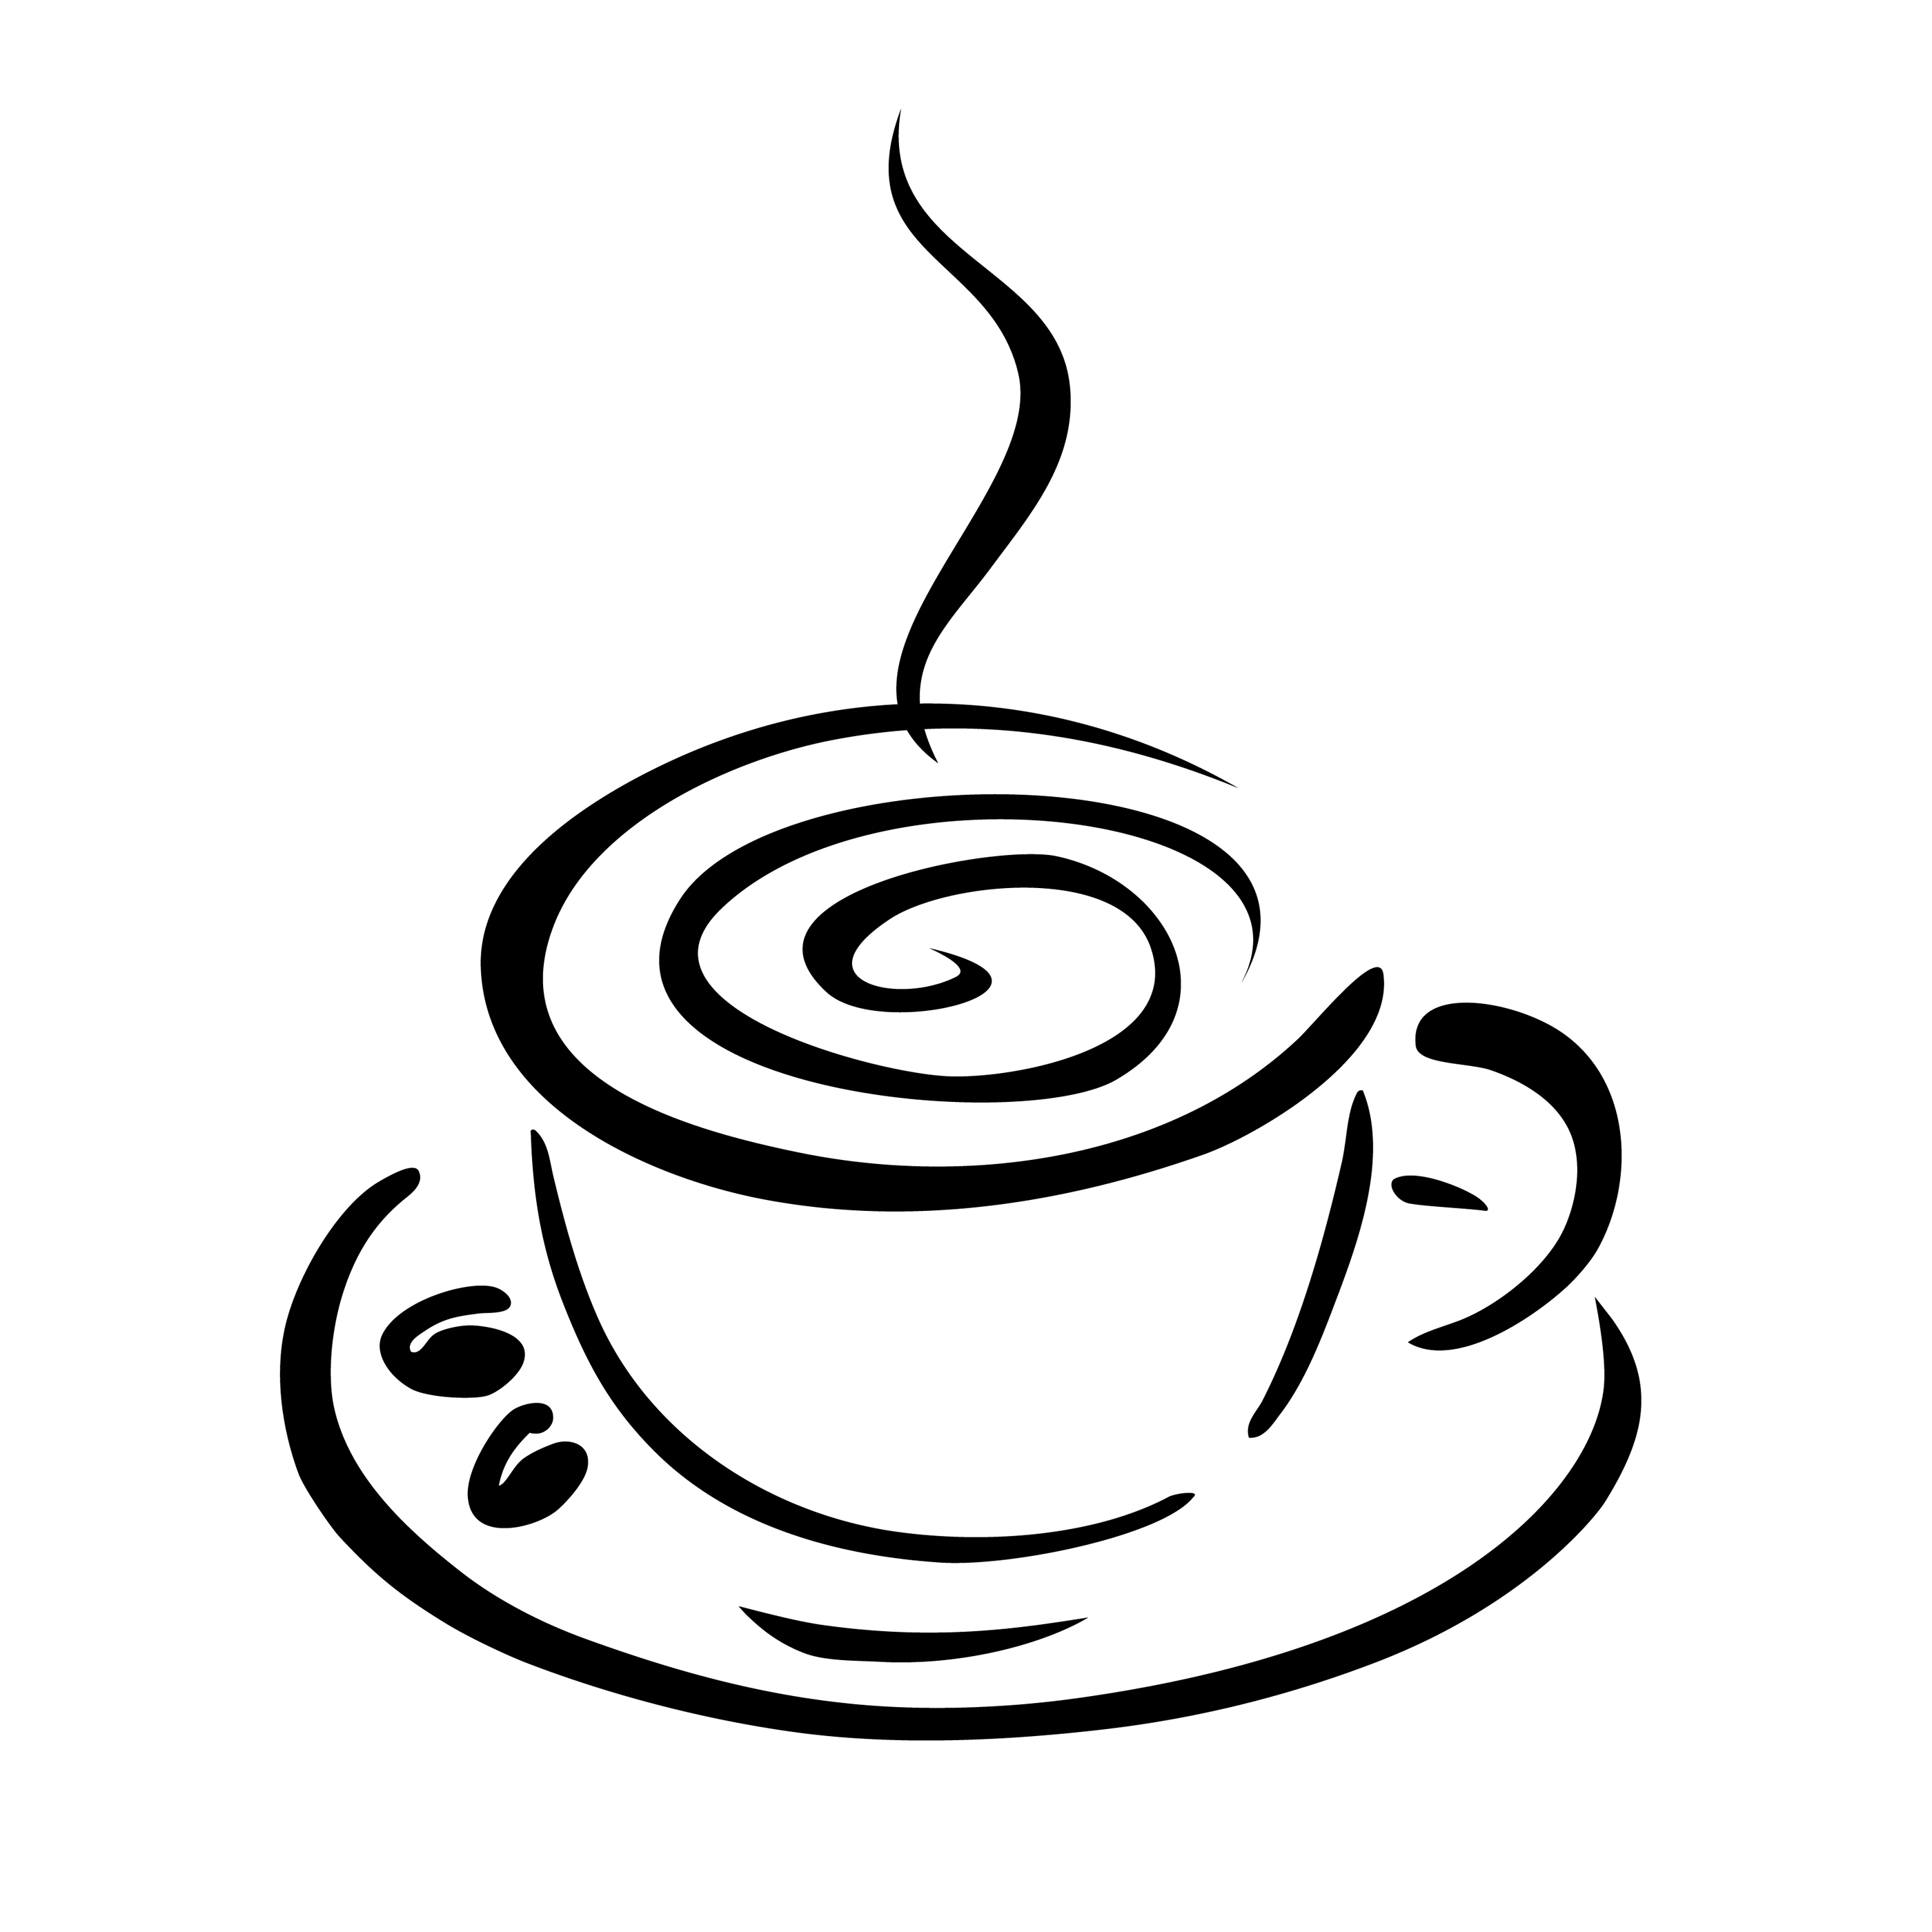 Coffee cup clip art free perf